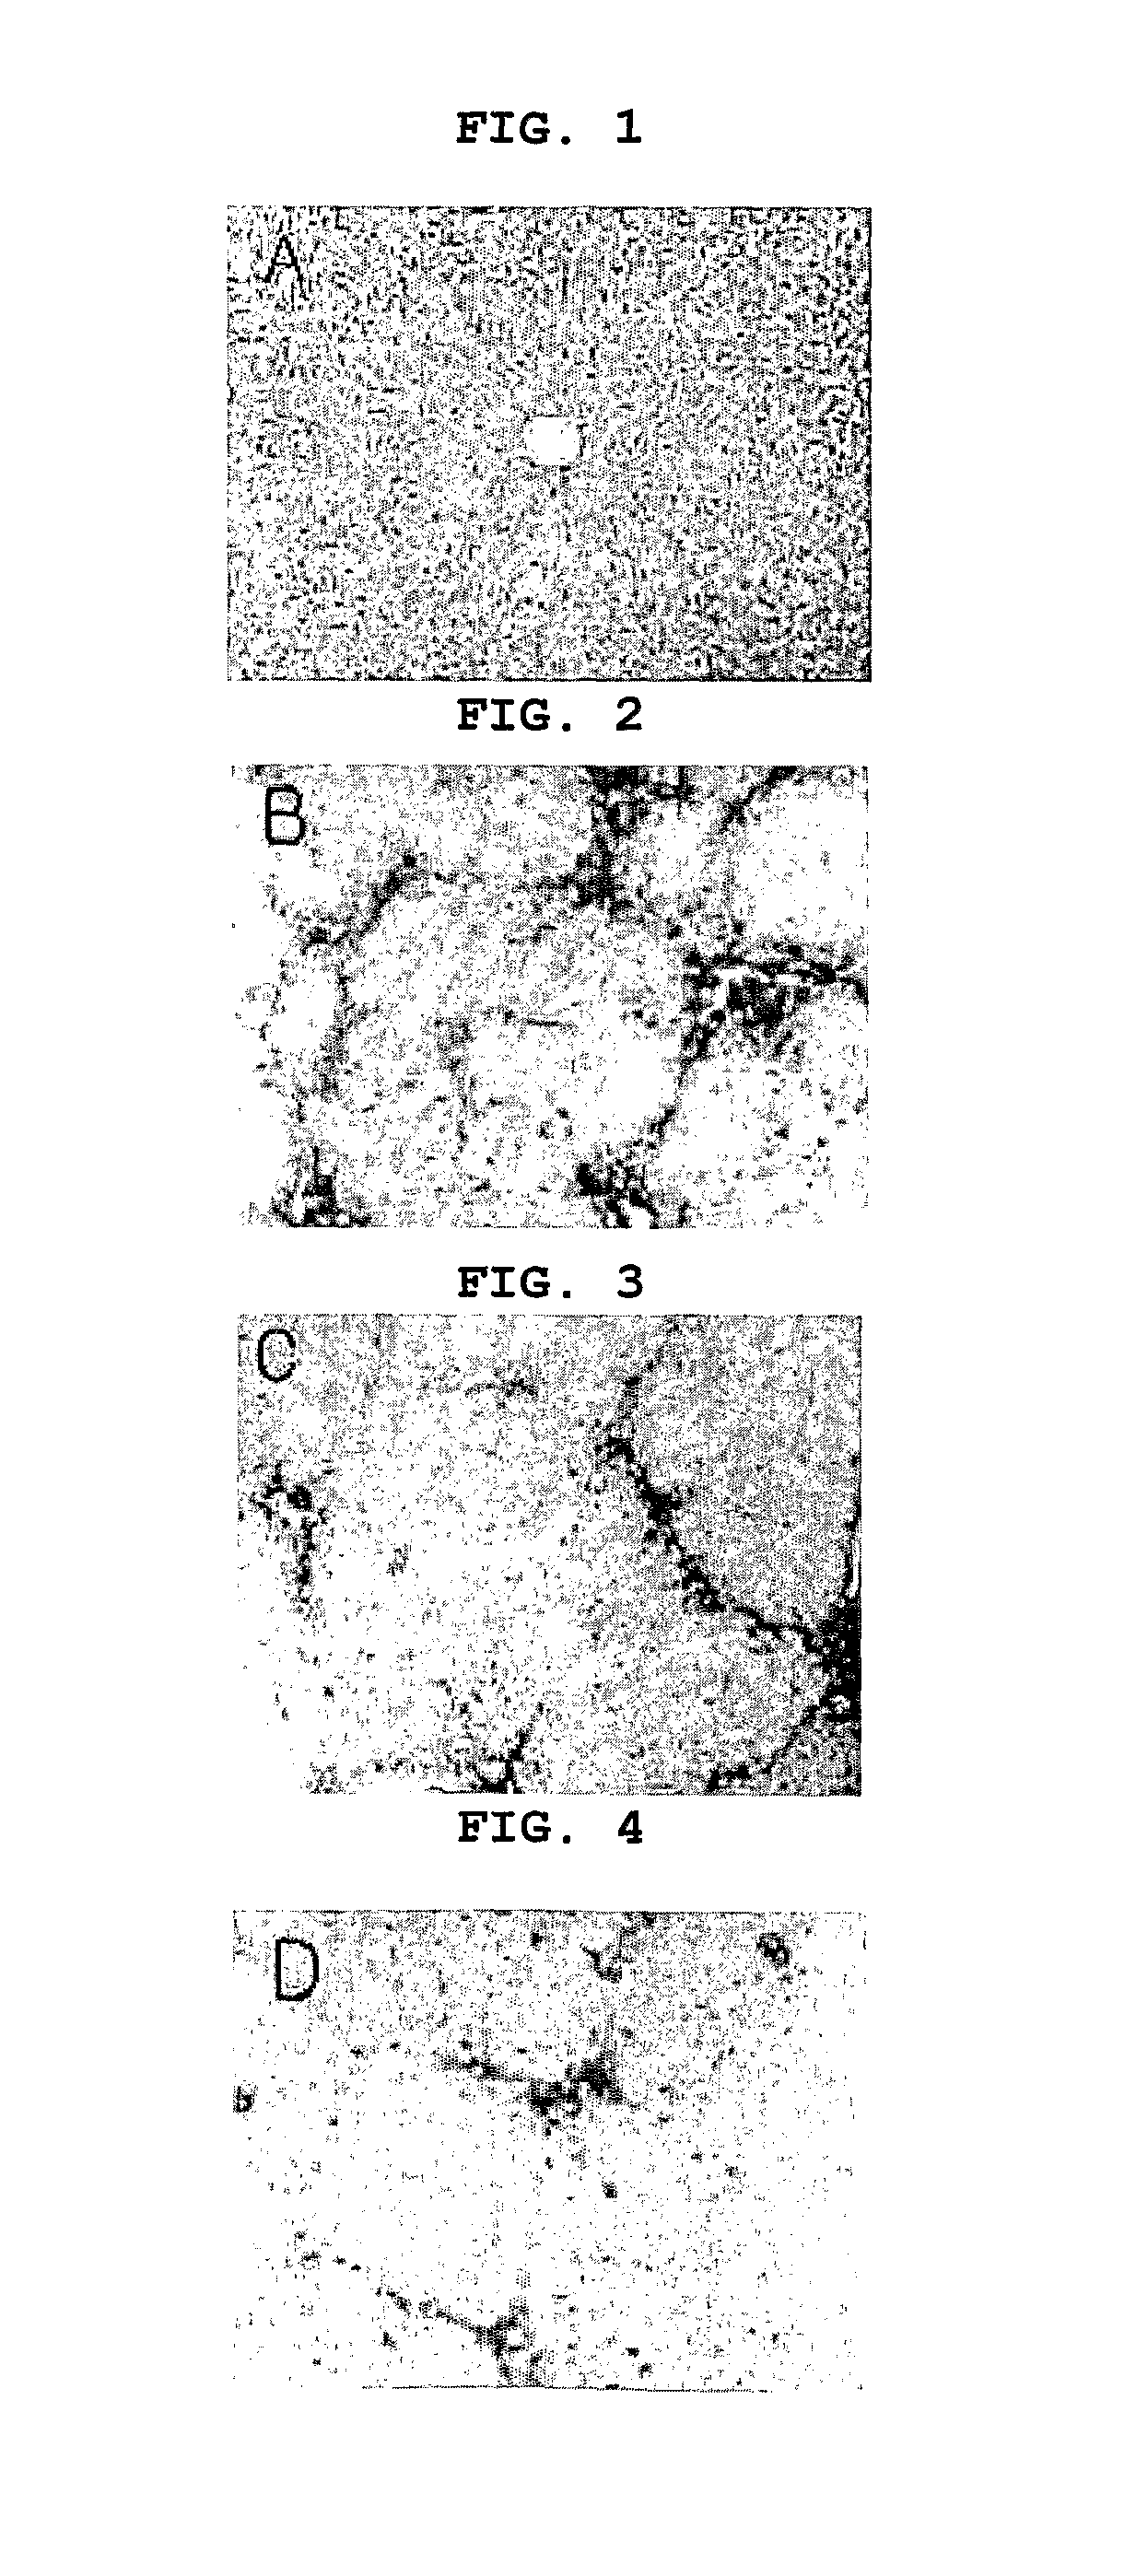 Agent for treatment of liver diseases containing pyrazolopyrimidinone derivative